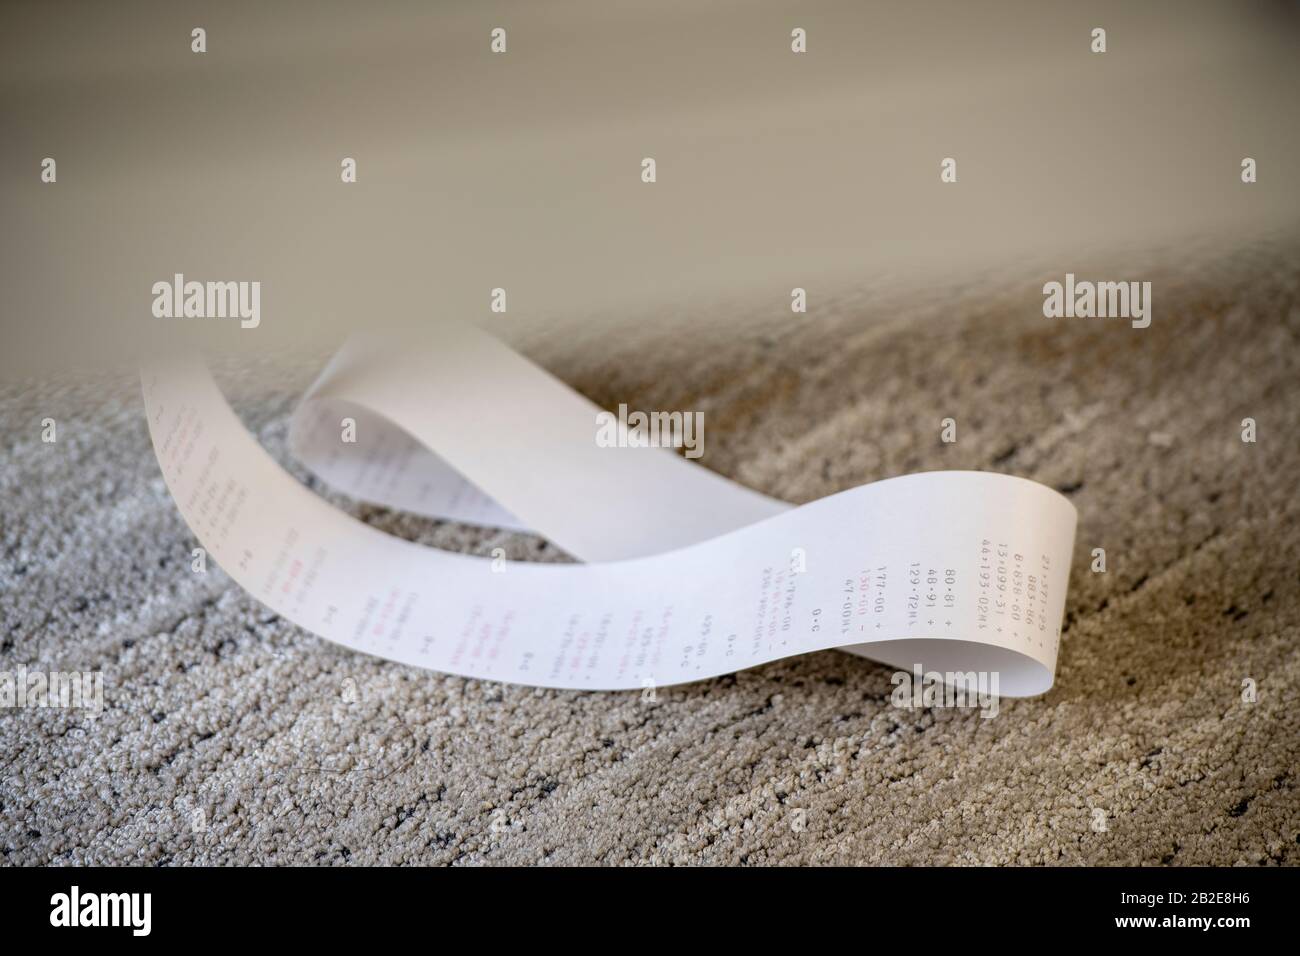 Adding Machine paper tape gathered on carpeted floor Stock Photo